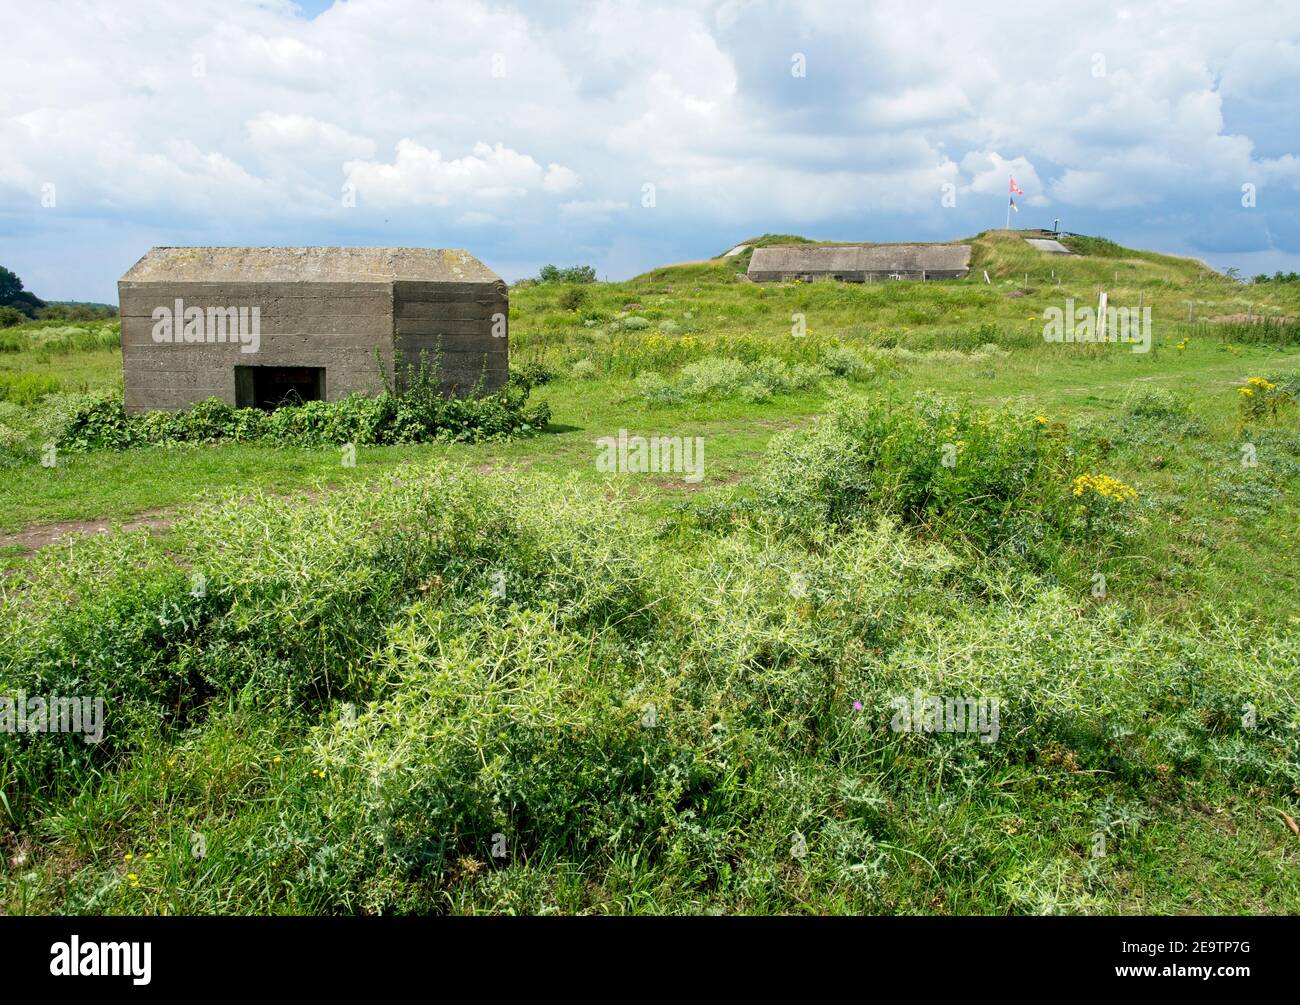 Doornenburg Netherlands - 11 July 2020 - Fort pannerden at fork of rivers  Rhine and Waal Stock Photo - Alamy